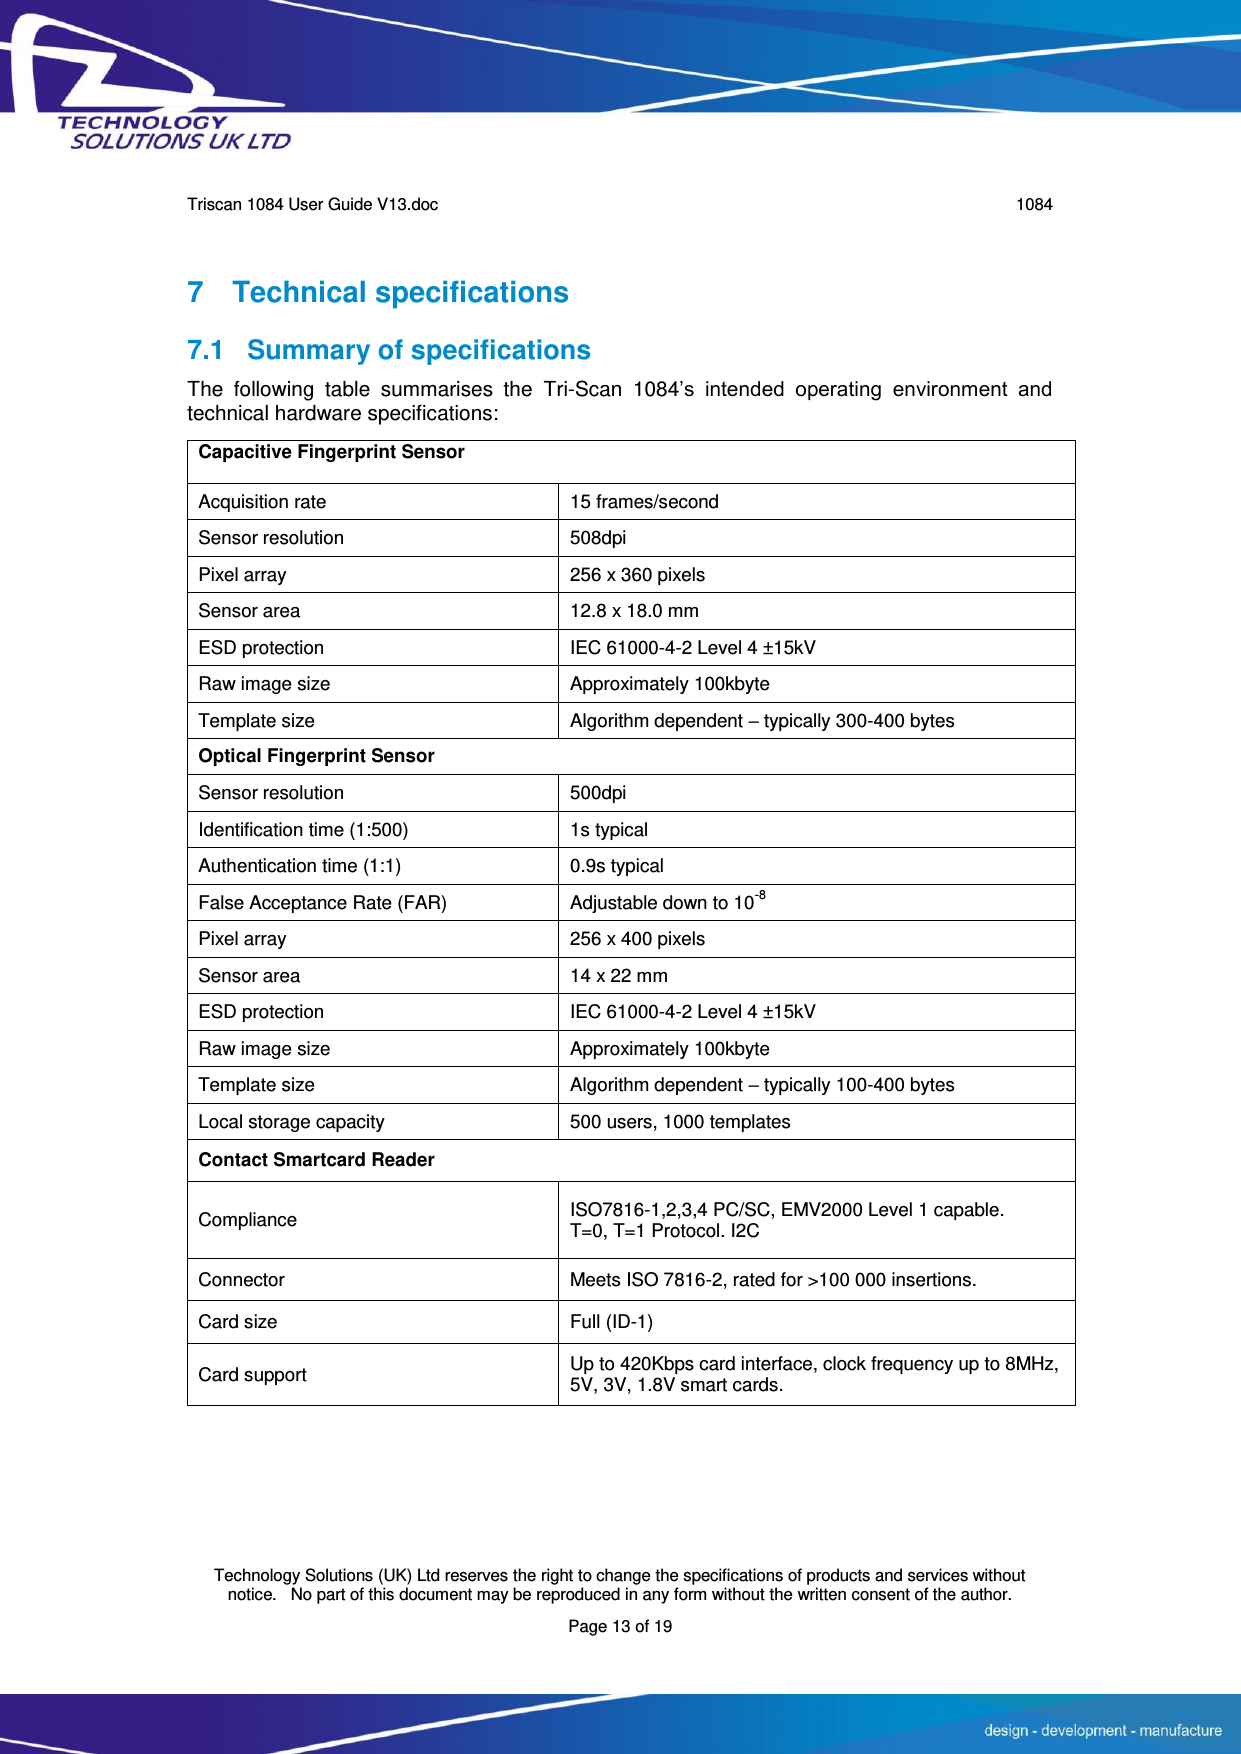      Triscan 1084 User Guide V13.doc   1084  Technology Solutions (UK) Ltd reserves the right to change the specifications of products and services without notice.   No part of this document may be reproduced in any form without the written consent of the author. Page 13 of 19 7  Technical specifications 7.1  Summary of specifications The  following  table  summarises  the  Tri-Scan  1084’s  intended  operating  environment  and technical hardware specifications:  Capacitive Fingerprint Sensor Acquisition rate 15 frames/second Sensor resolution 508dpi Pixel array 256 x 360 pixels Sensor area 12.8 x 18.0 mm ESD protection IEC 61000-4-2 Level 4 ±15kV Raw image size Approximately 100kbyte Template size Algorithm dependent – typically 300-400 bytes Optical Fingerprint Sensor Sensor resolution 500dpi Identification time (1:500) 1s typical Authentication time (1:1) 0.9s typical False Acceptance Rate (FAR) Adjustable down to 10-8 Pixel array 256 x 400 pixels Sensor area 14 x 22 mm ESD protection IEC 61000-4-2 Level 4 ±15kV Raw image size Approximately 100kbyte Template size Algorithm dependent – typically 100-400 bytes Local storage capacity 500 users, 1000 templates Contact Smartcard Reader Compliance ISO7816-1,2,3,4 PC/SC, EMV2000 Level 1 capable. T=0, T=1 Protocol. I2C Connector Meets ISO 7816-2, rated for &gt;100 000 insertions. Card size Full (ID-1) Card support Up to 420Kbps card interface, clock frequency up to 8MHz, 5V, 3V, 1.8V smart cards. 